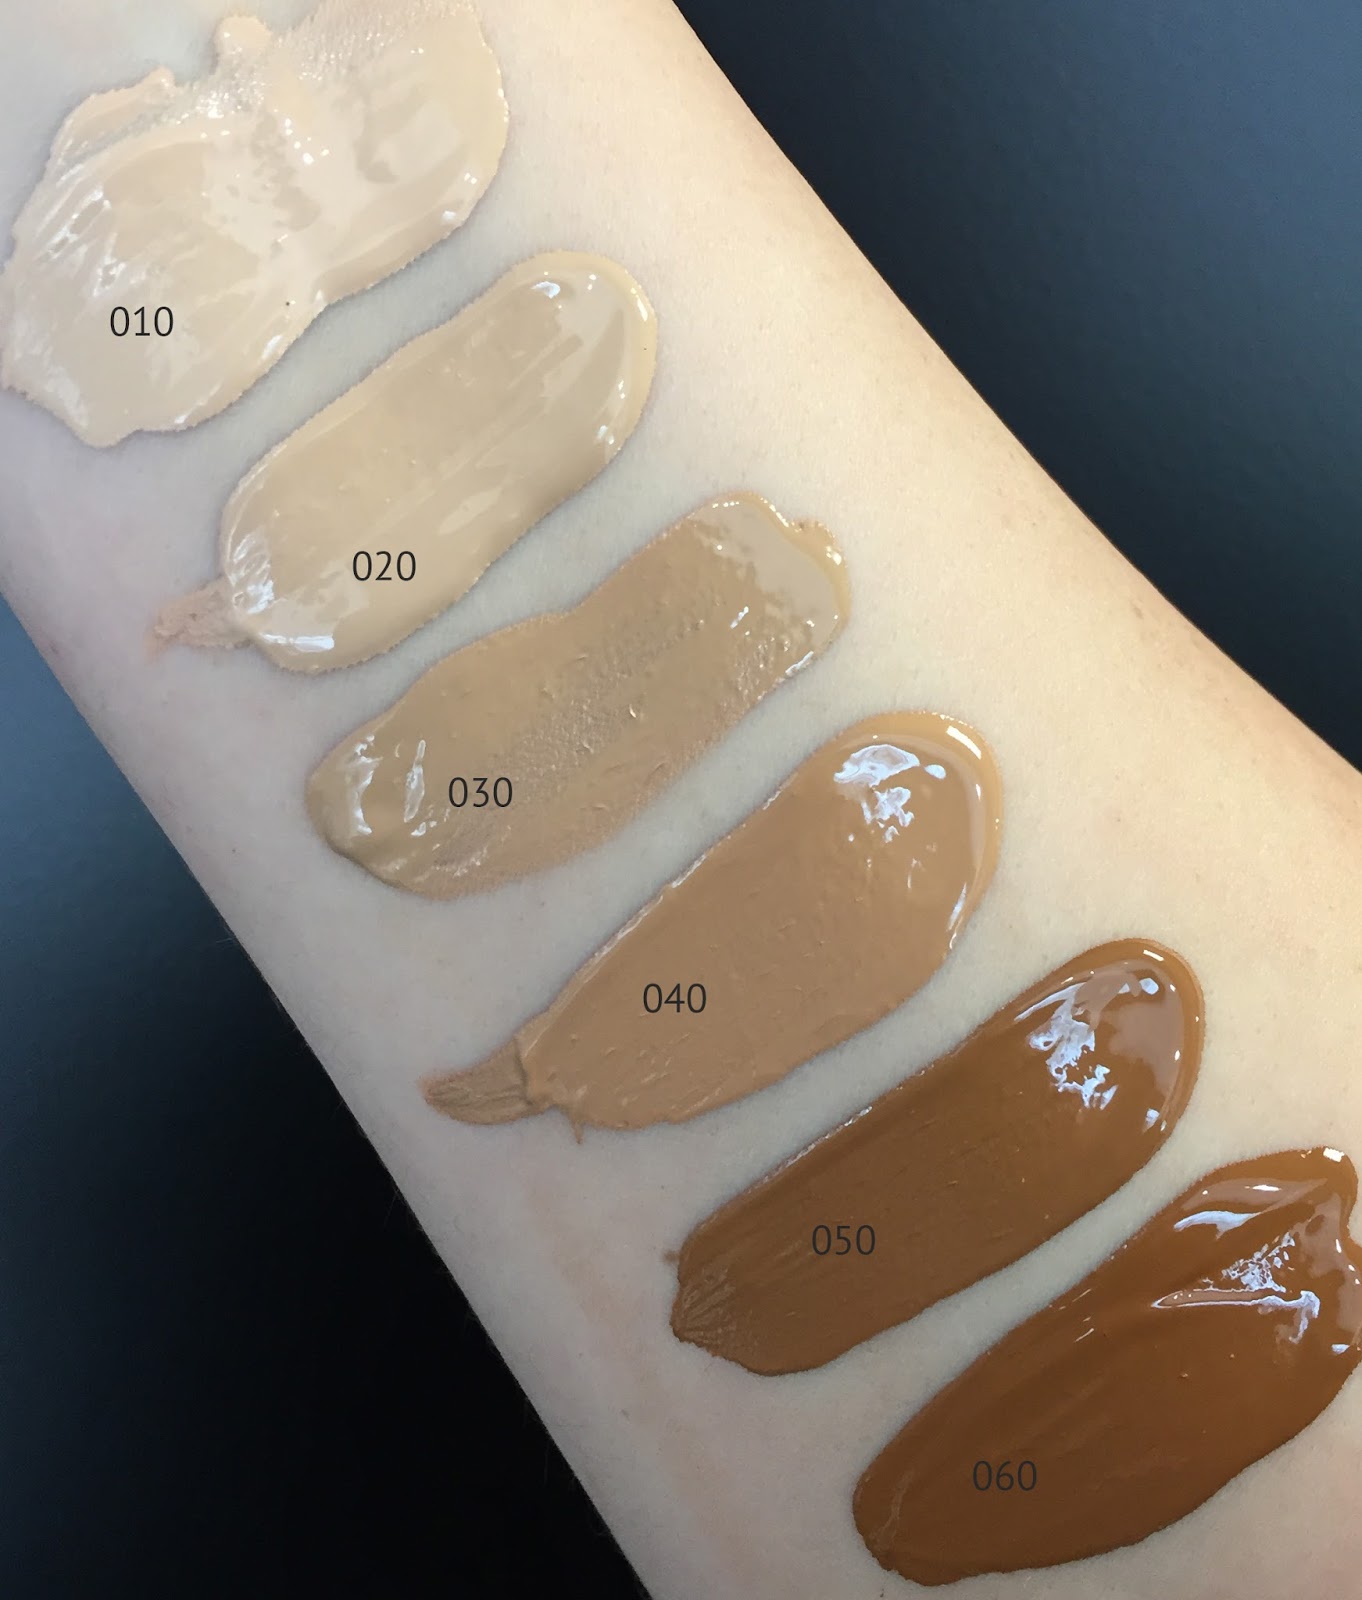 dior face and body foundation shade finder